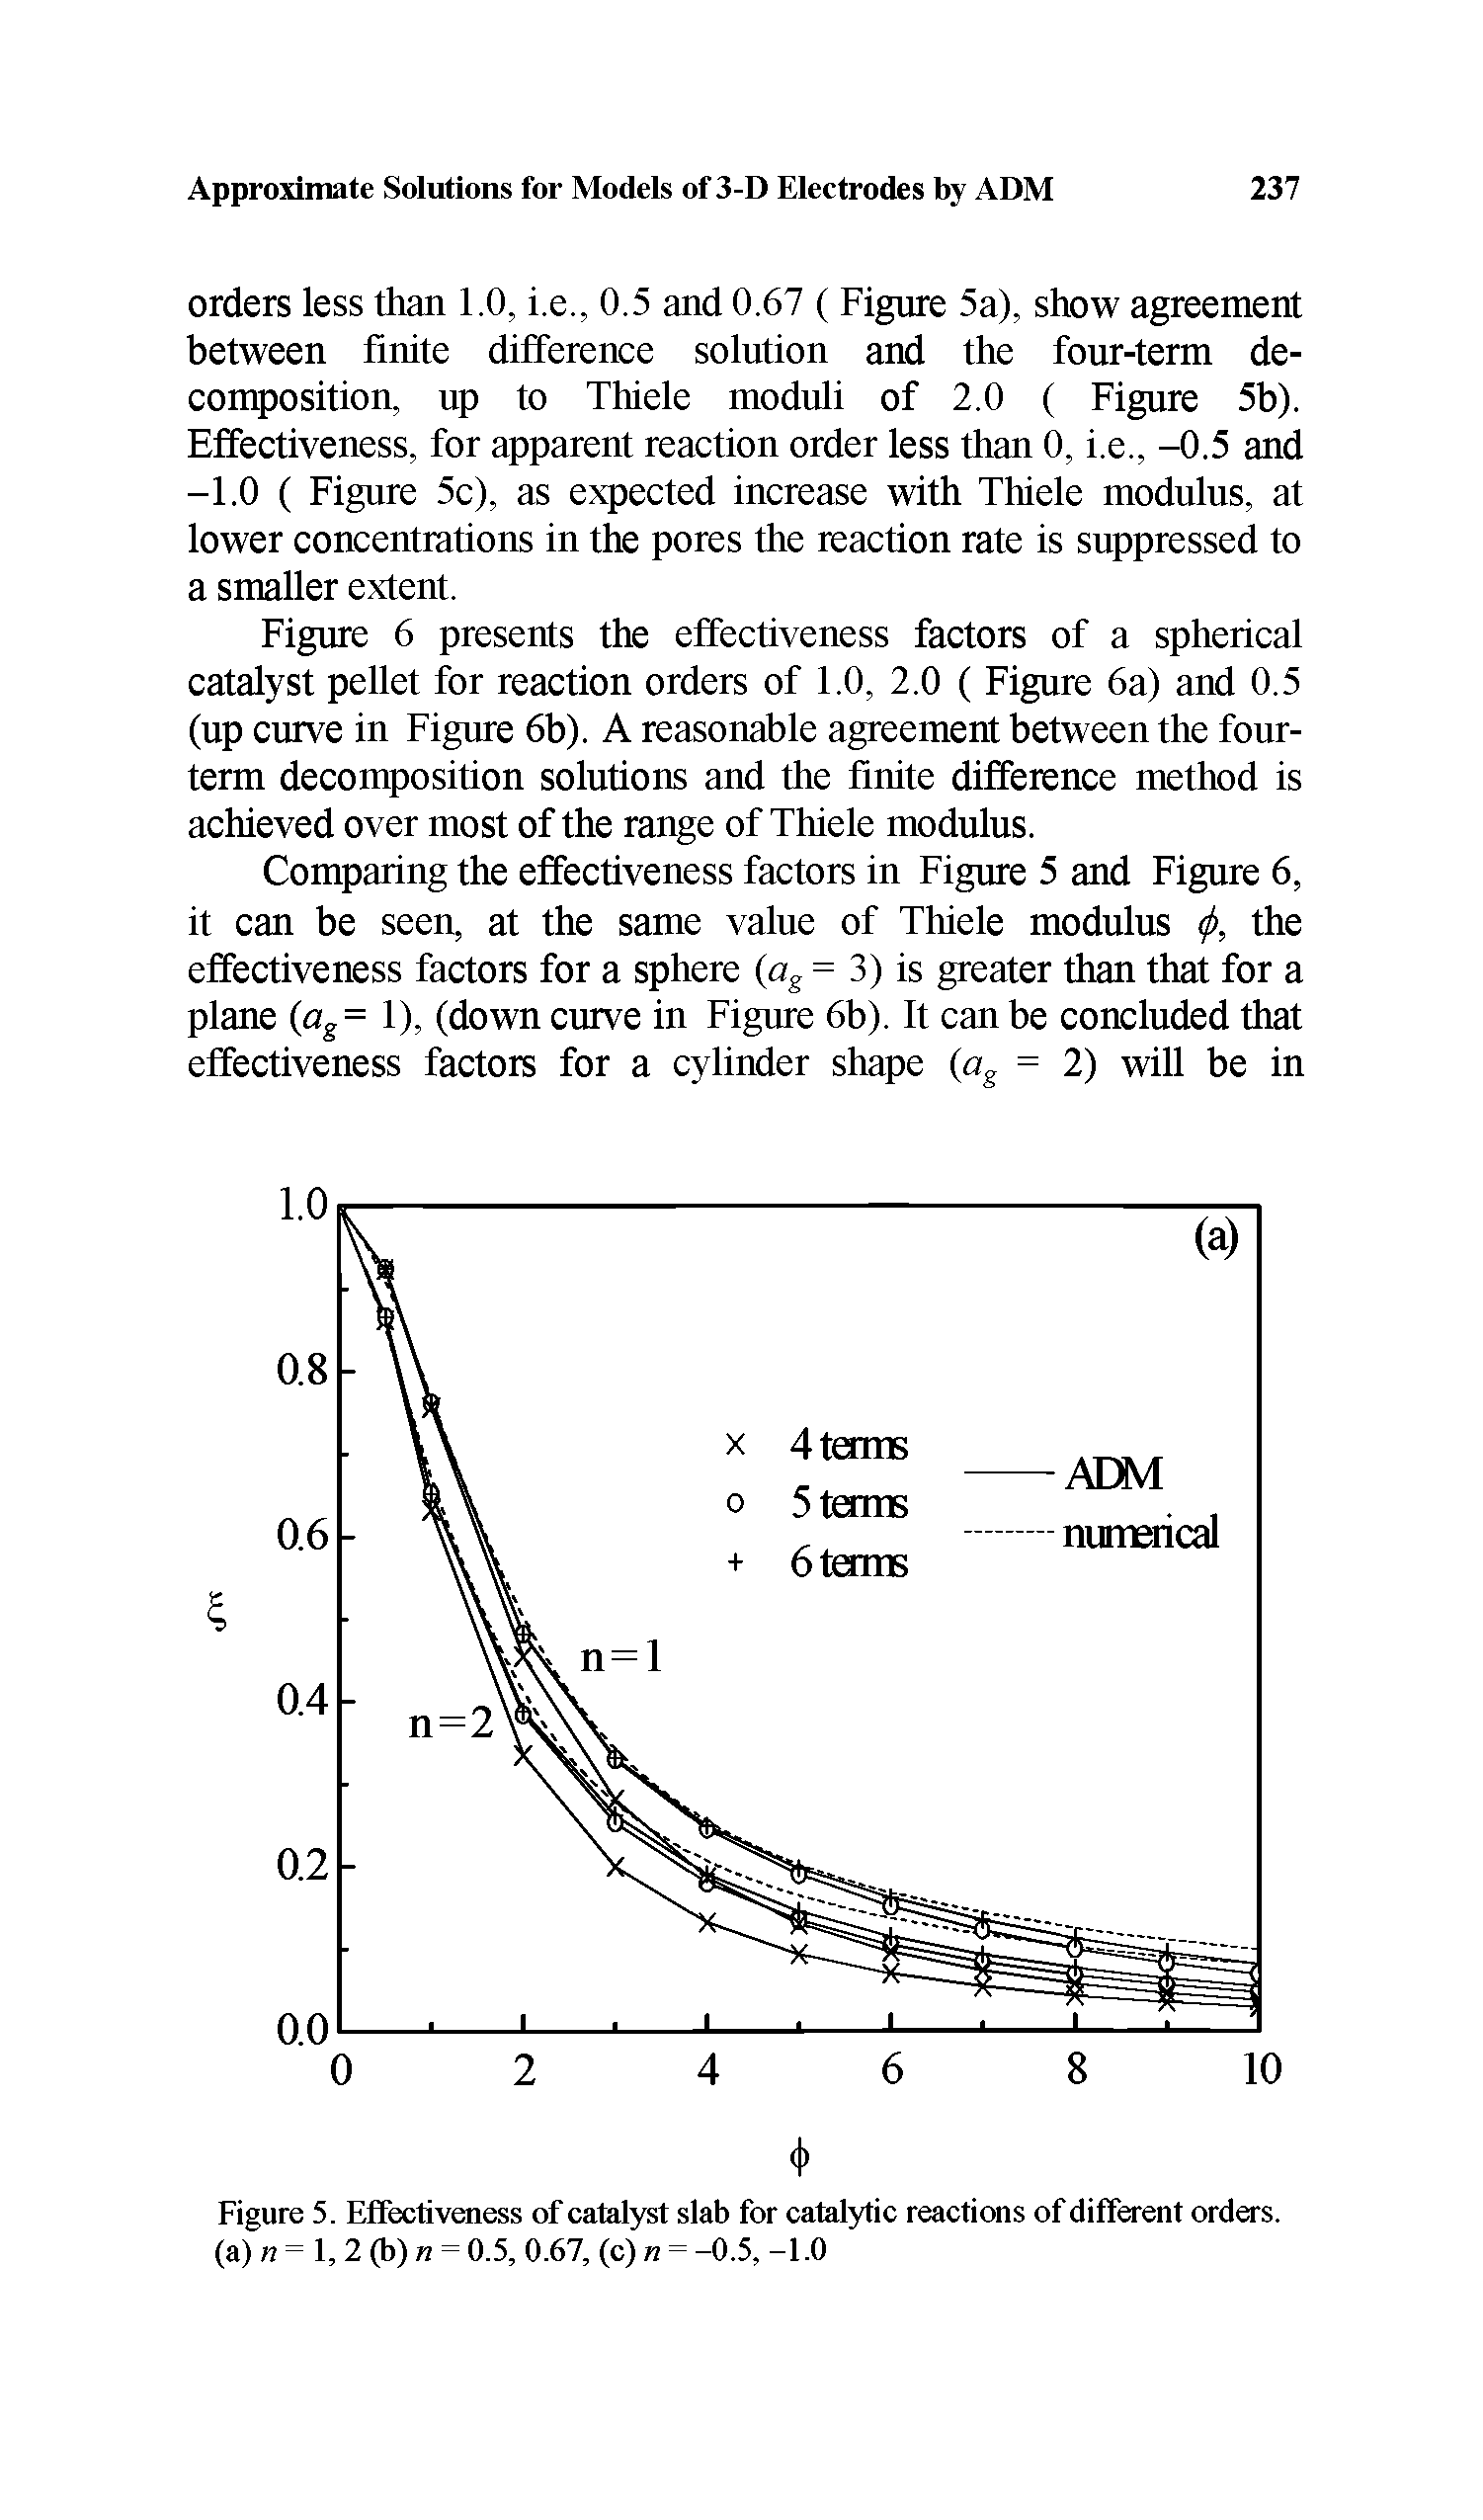 Figure 6 presents the effectiveness factors of a spherical catalyst pellet for reaction orders of 1.0, 2.0 ( Figure 6a) and 0.5 (up curve in Figure 6b). A reasonable agreement between the four-term decomposition solutions and the finite difference method is achieved over most of the range of Thiele modulus.